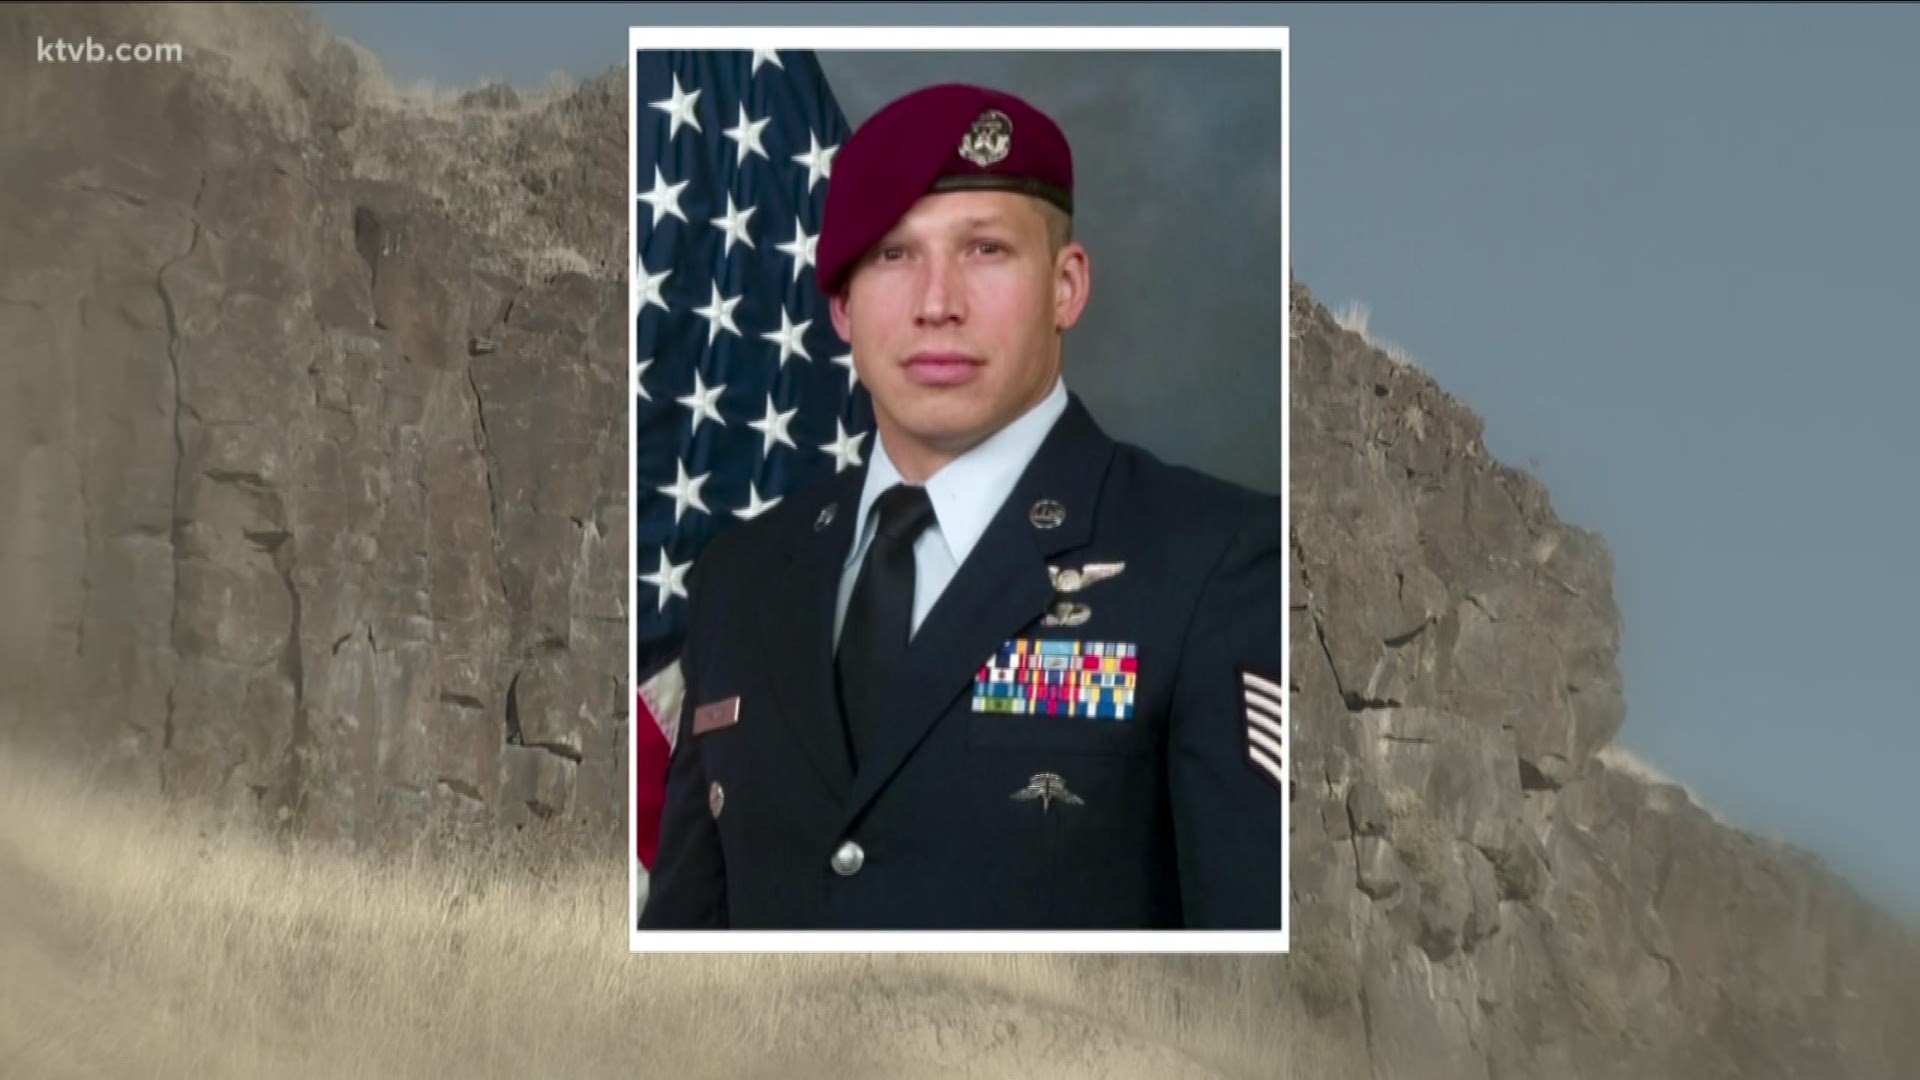 Peter Kraines, a special tactics pararescueman, was participating in mountain rescue technique training when he fell, according to the Air Force.